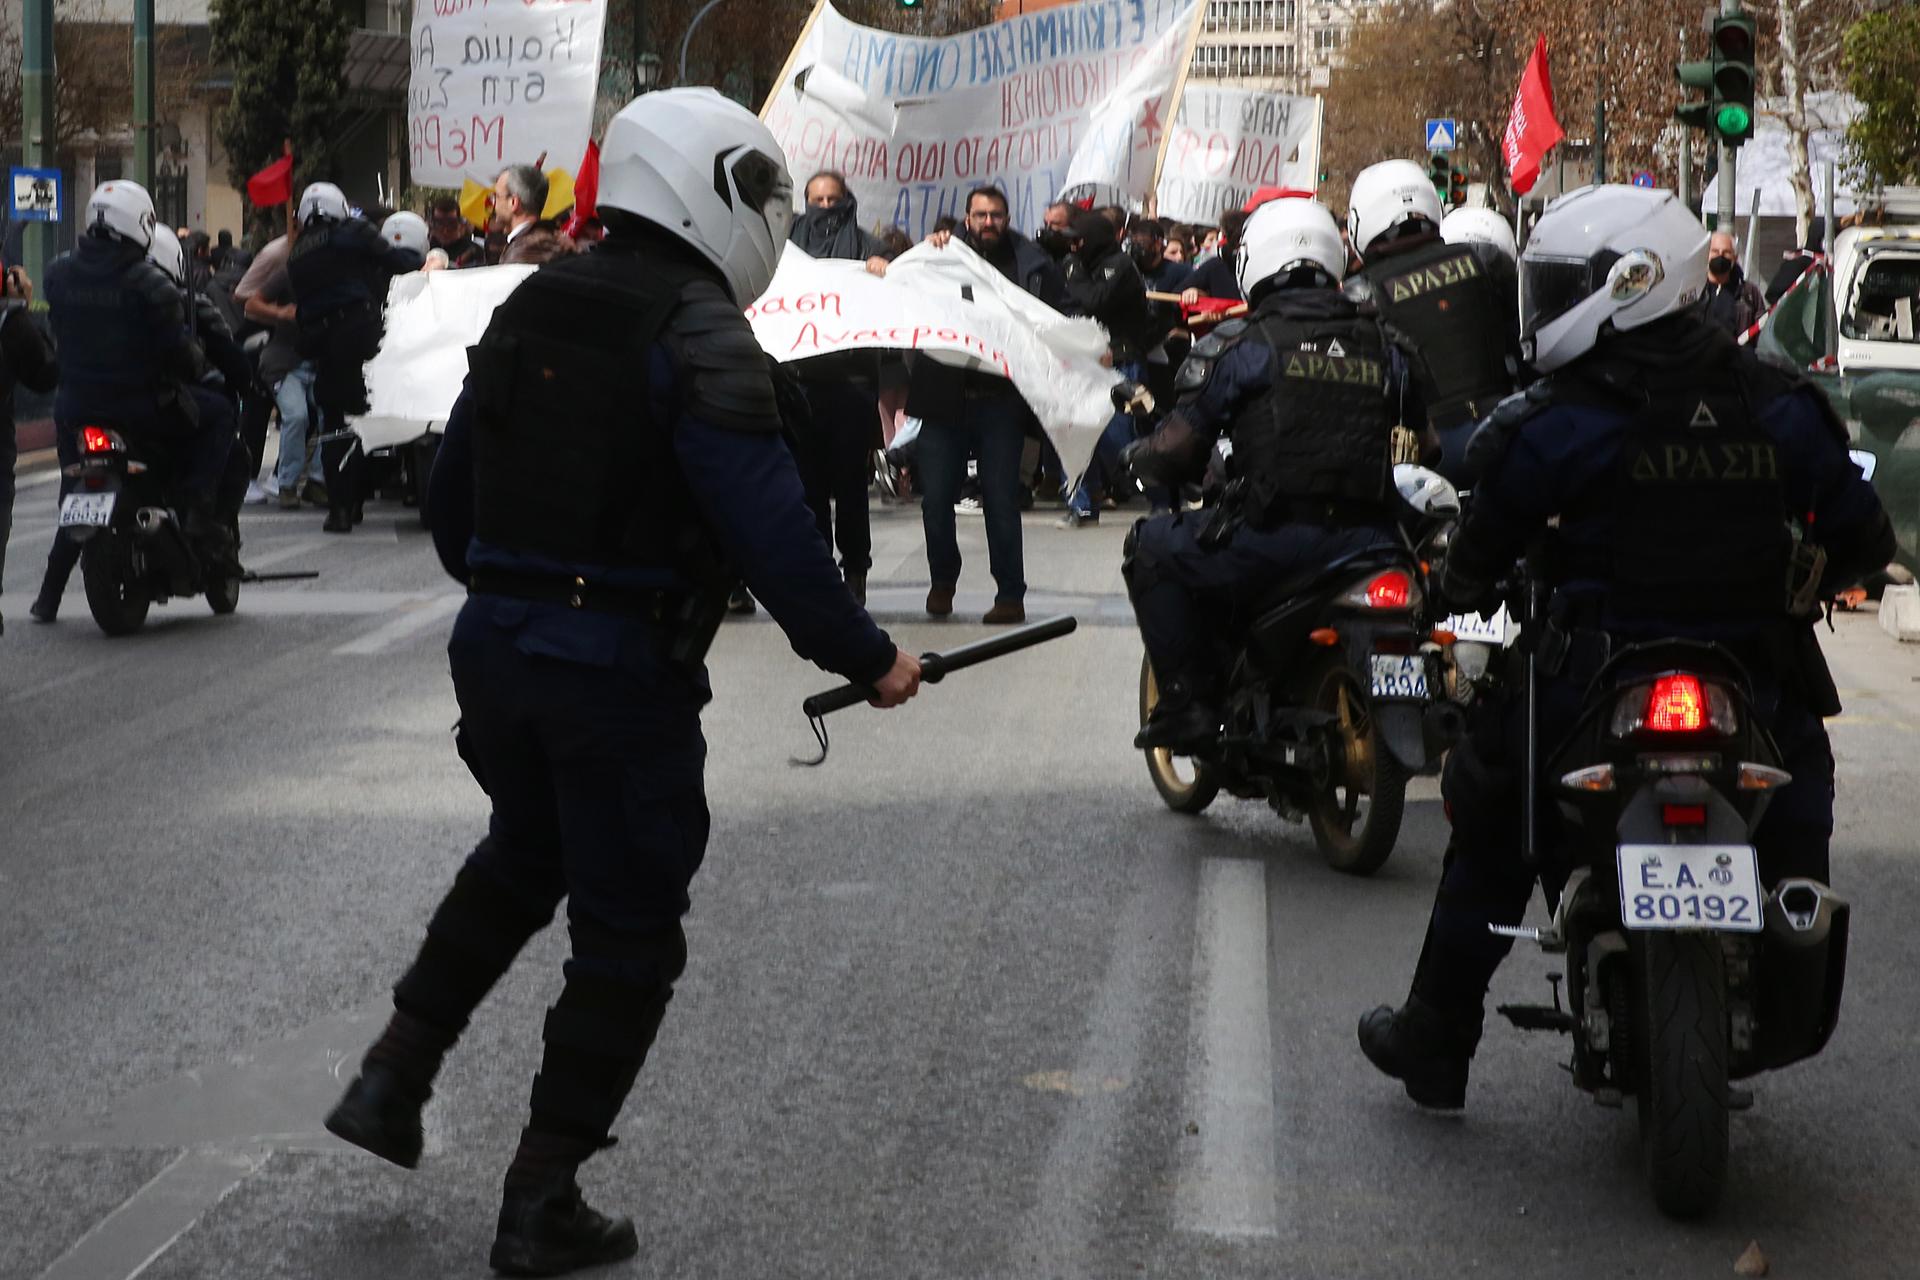 Riot policemen on motorcycles try to disperse demonstrators during clashes after the end of a rally in honor of the 57 victims of Greece's deadliest train crash, in central Athens, Greece, 05 March 2023. EFE/EPA/ORESTIS PANAGIOTOU